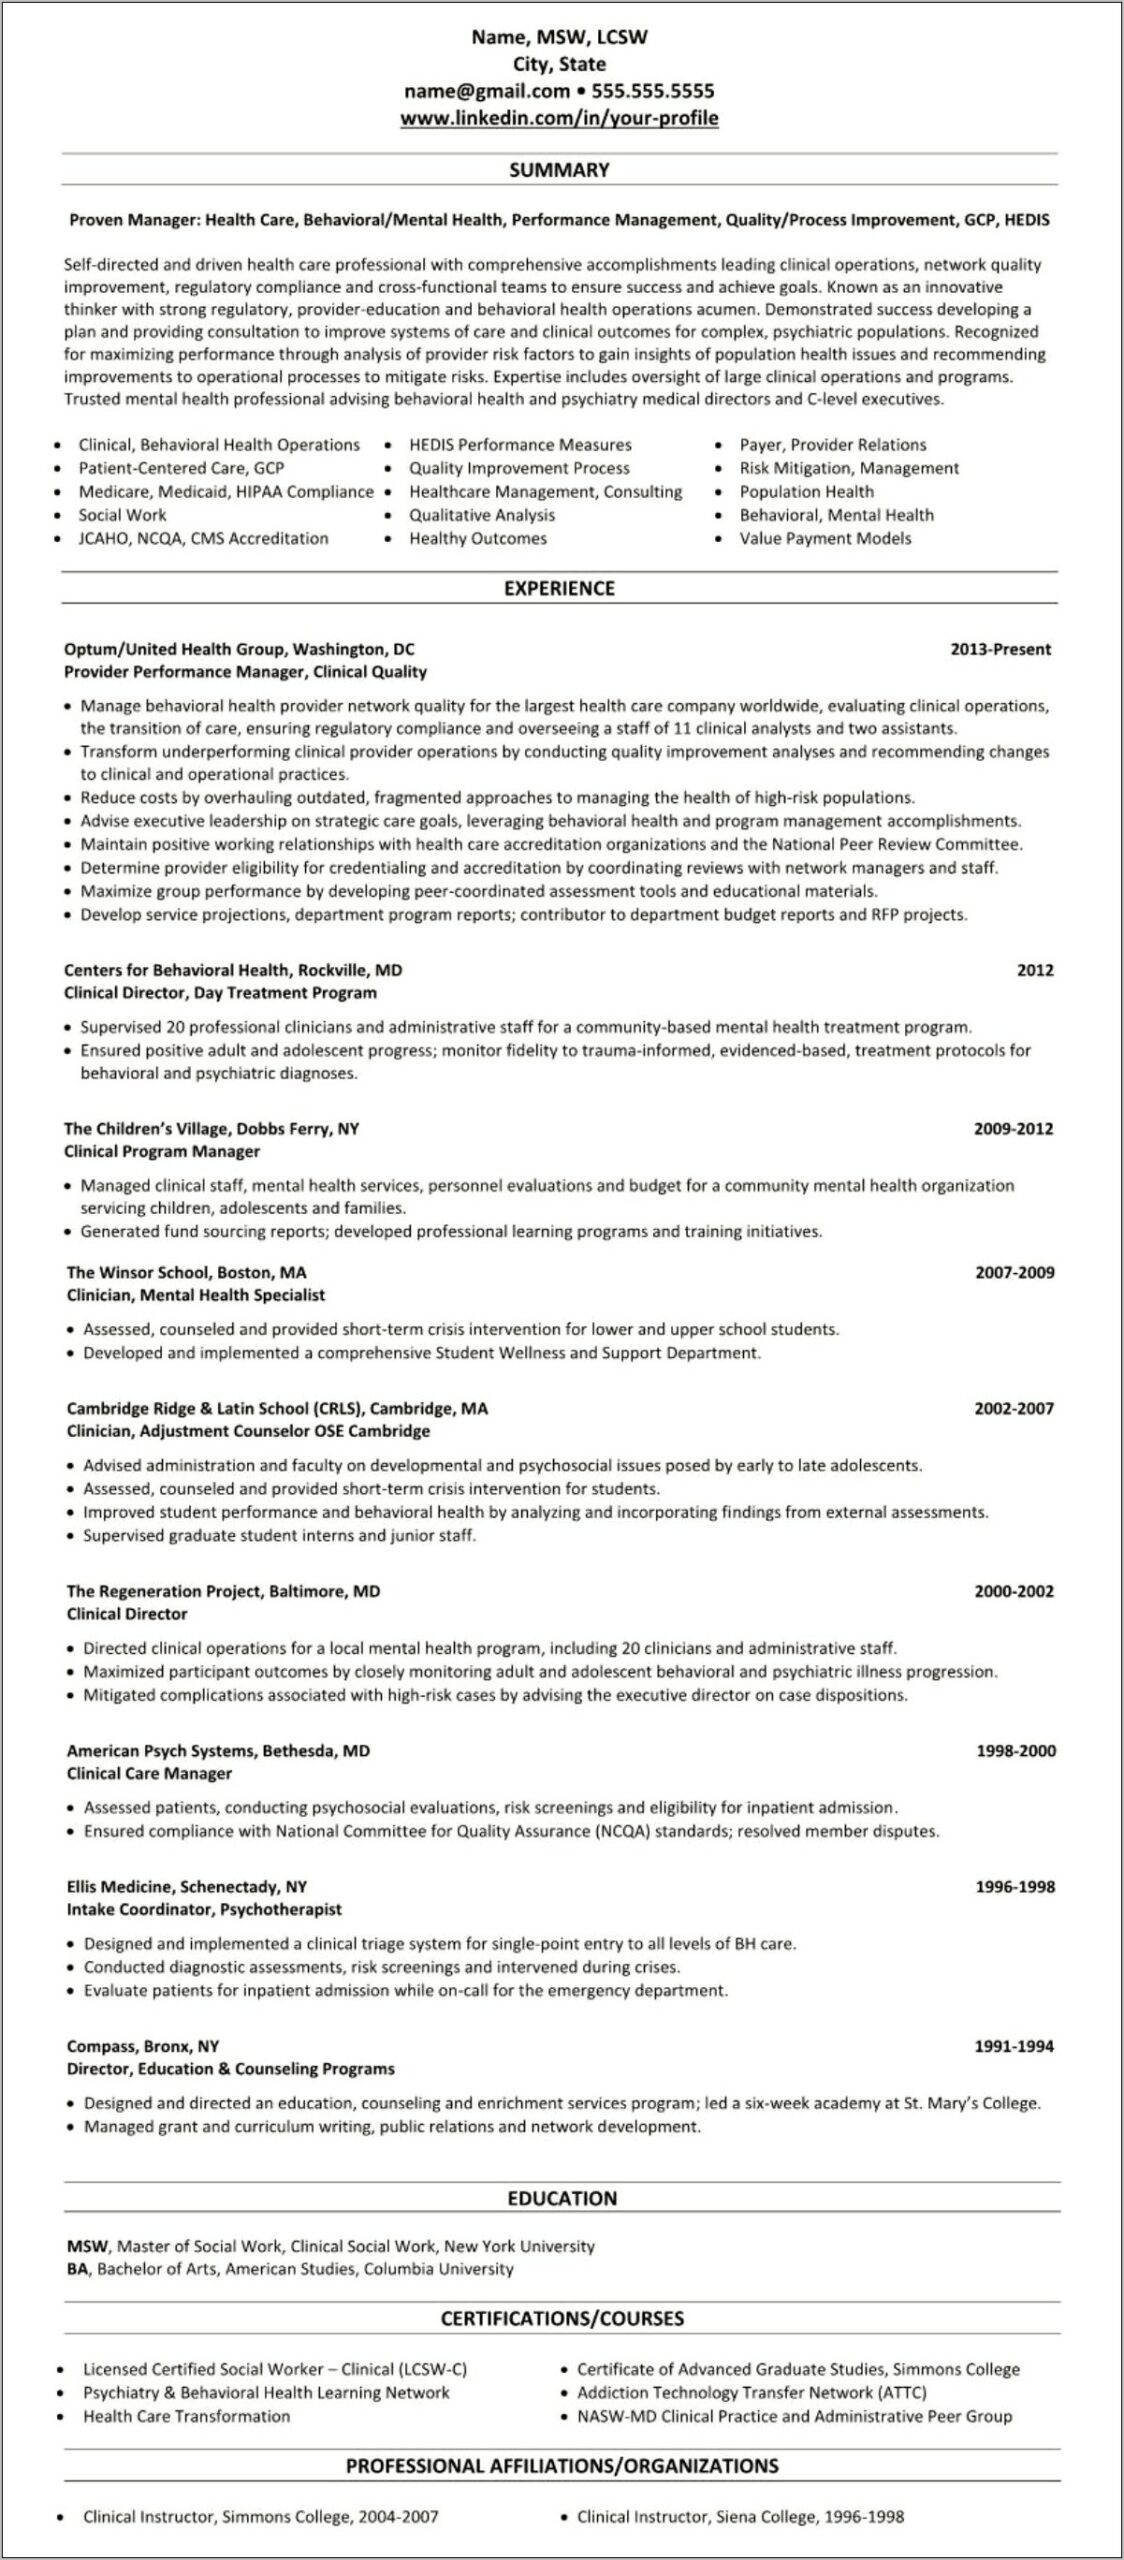 Mental Health Professional Summary For Resume